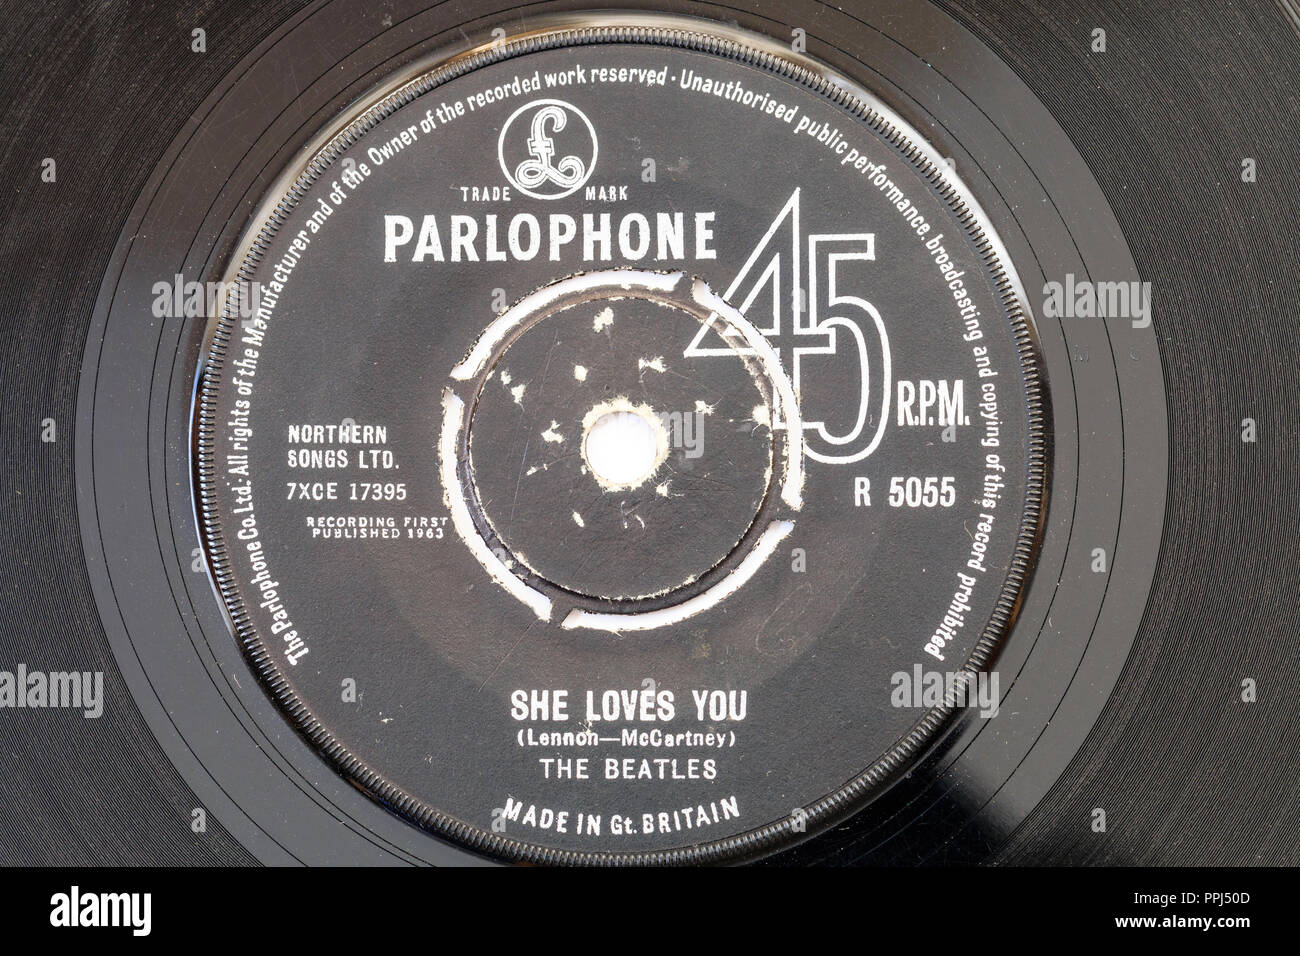 45 single track record on Parlophone label. The Beatles, 'She loves You' by Lennon and McCartney. 1963 R5055 Stock Photo